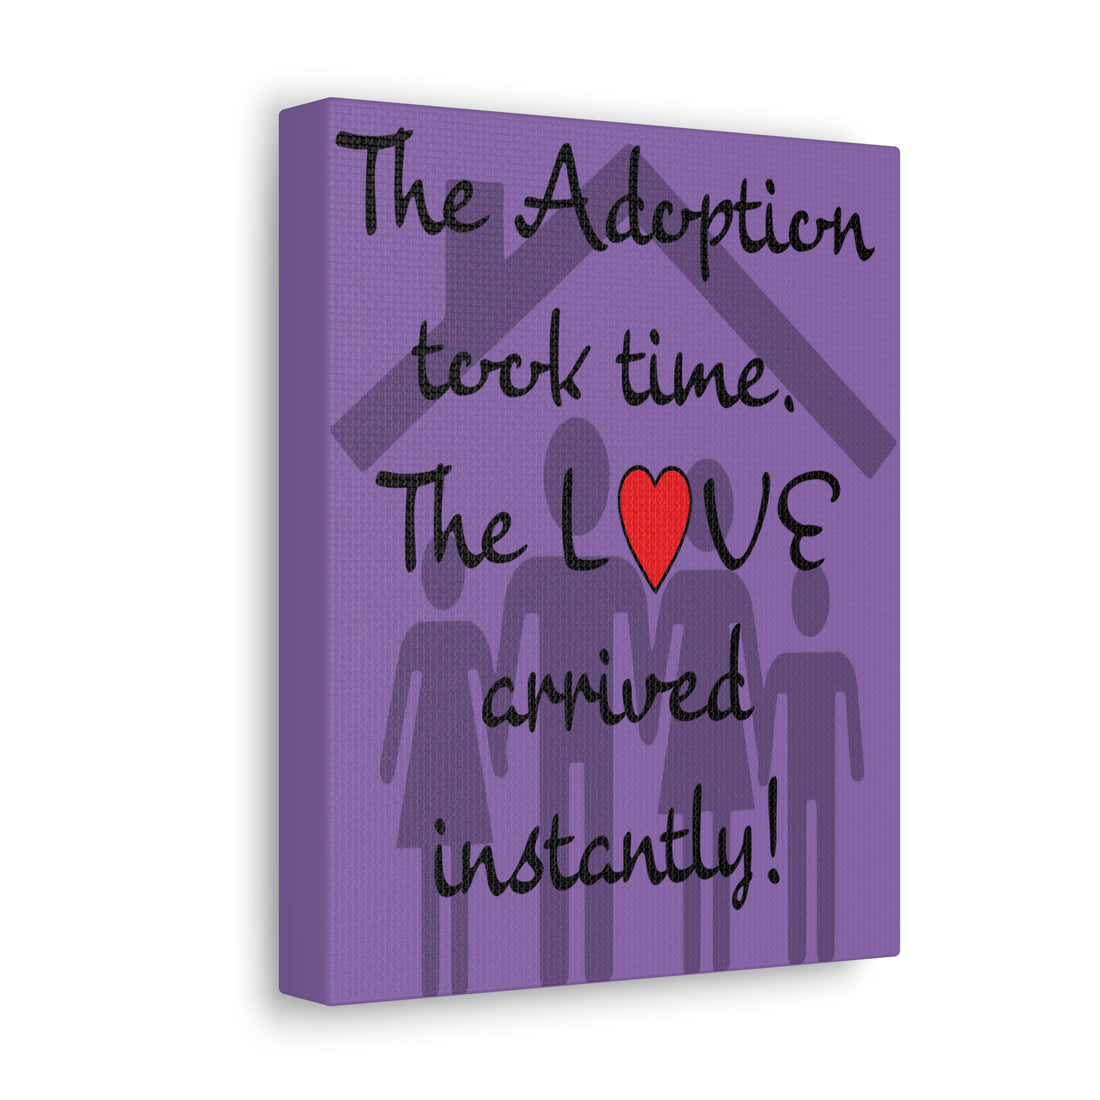 Adoption took time but Love came instantly - Canvas